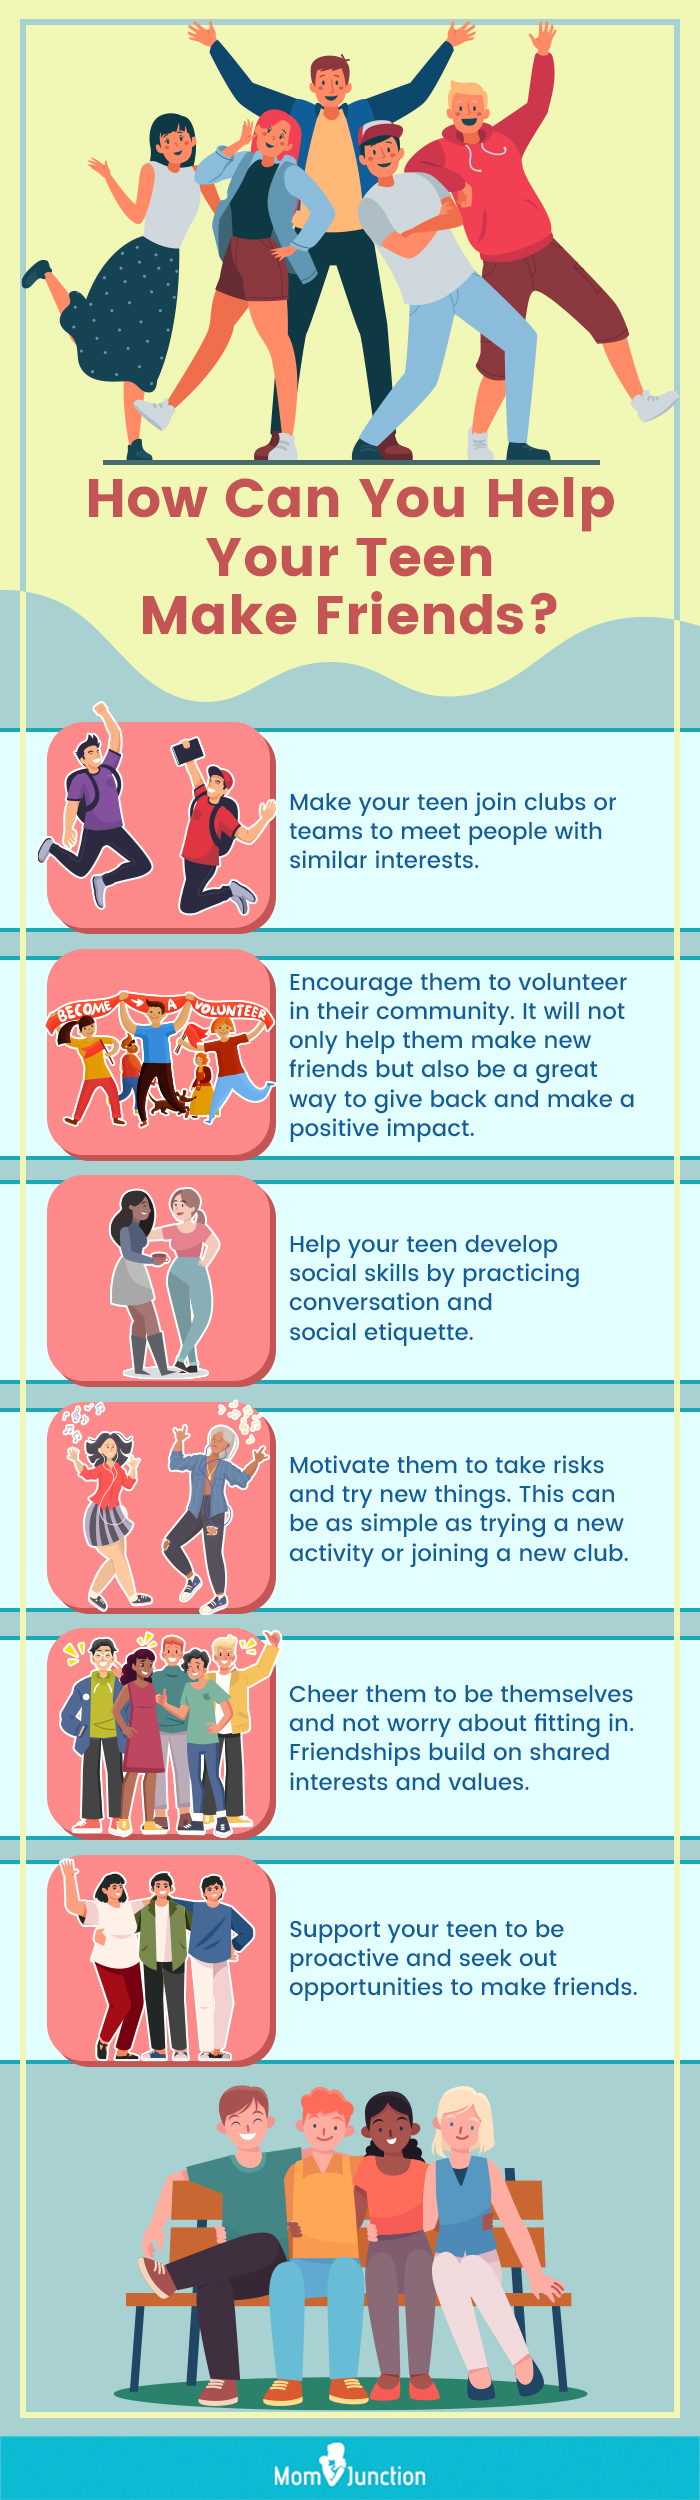 how can you help your teen make friends (infographic)